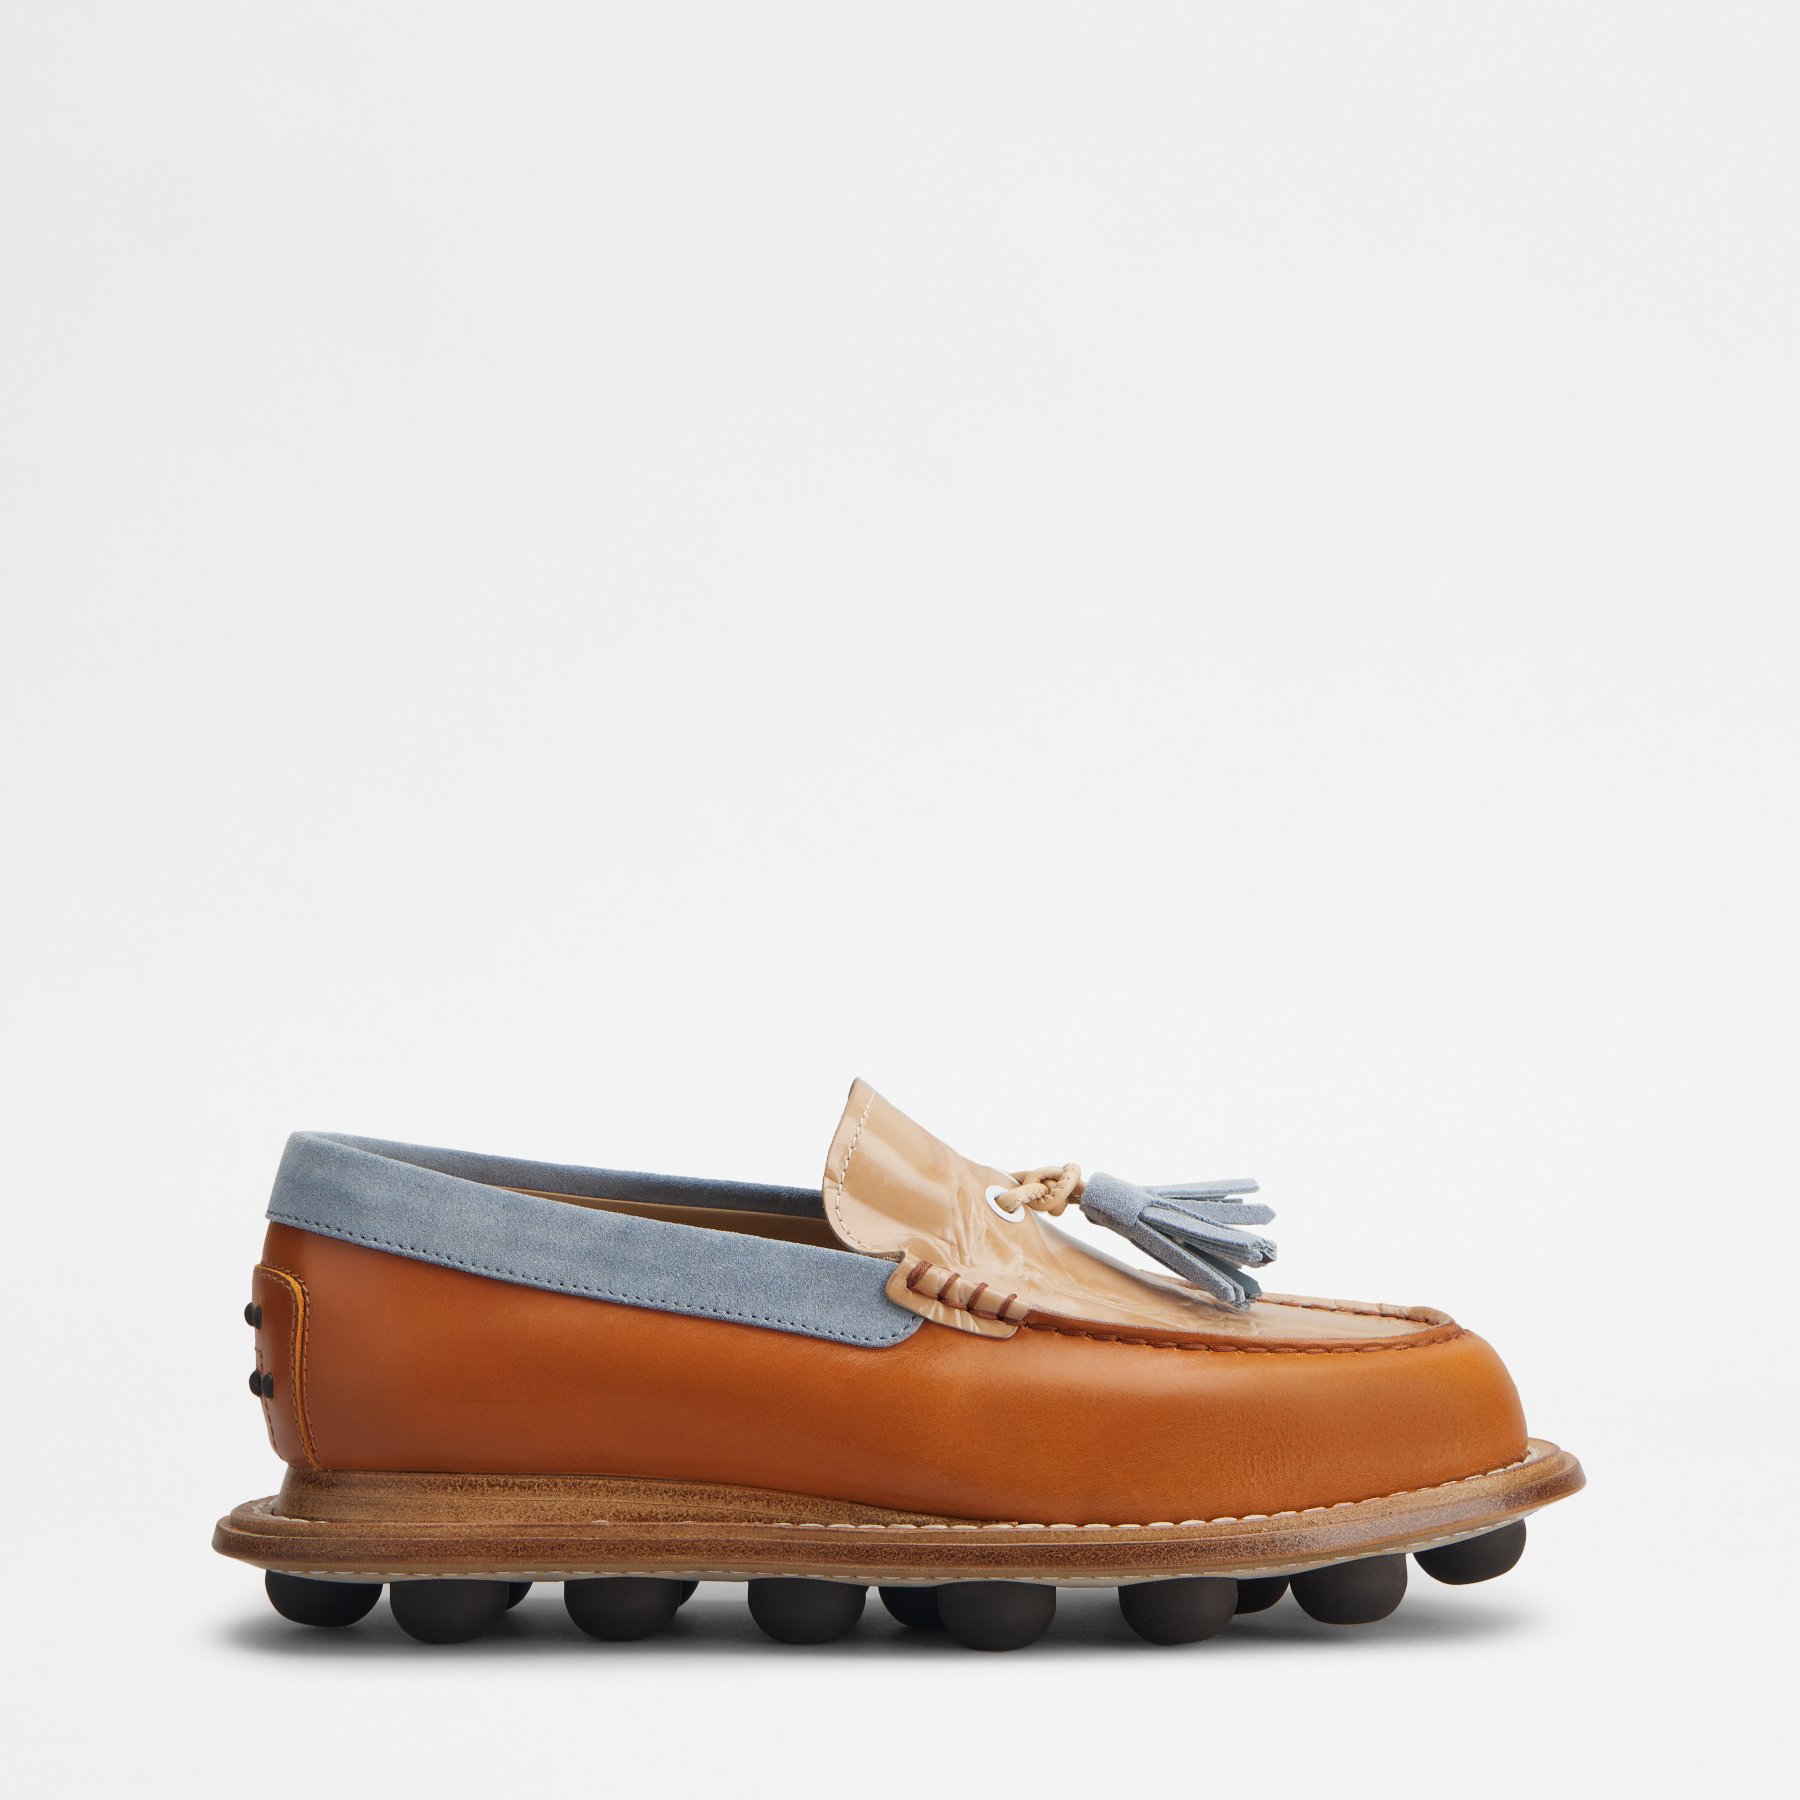 hender-scheme-tods-product-03